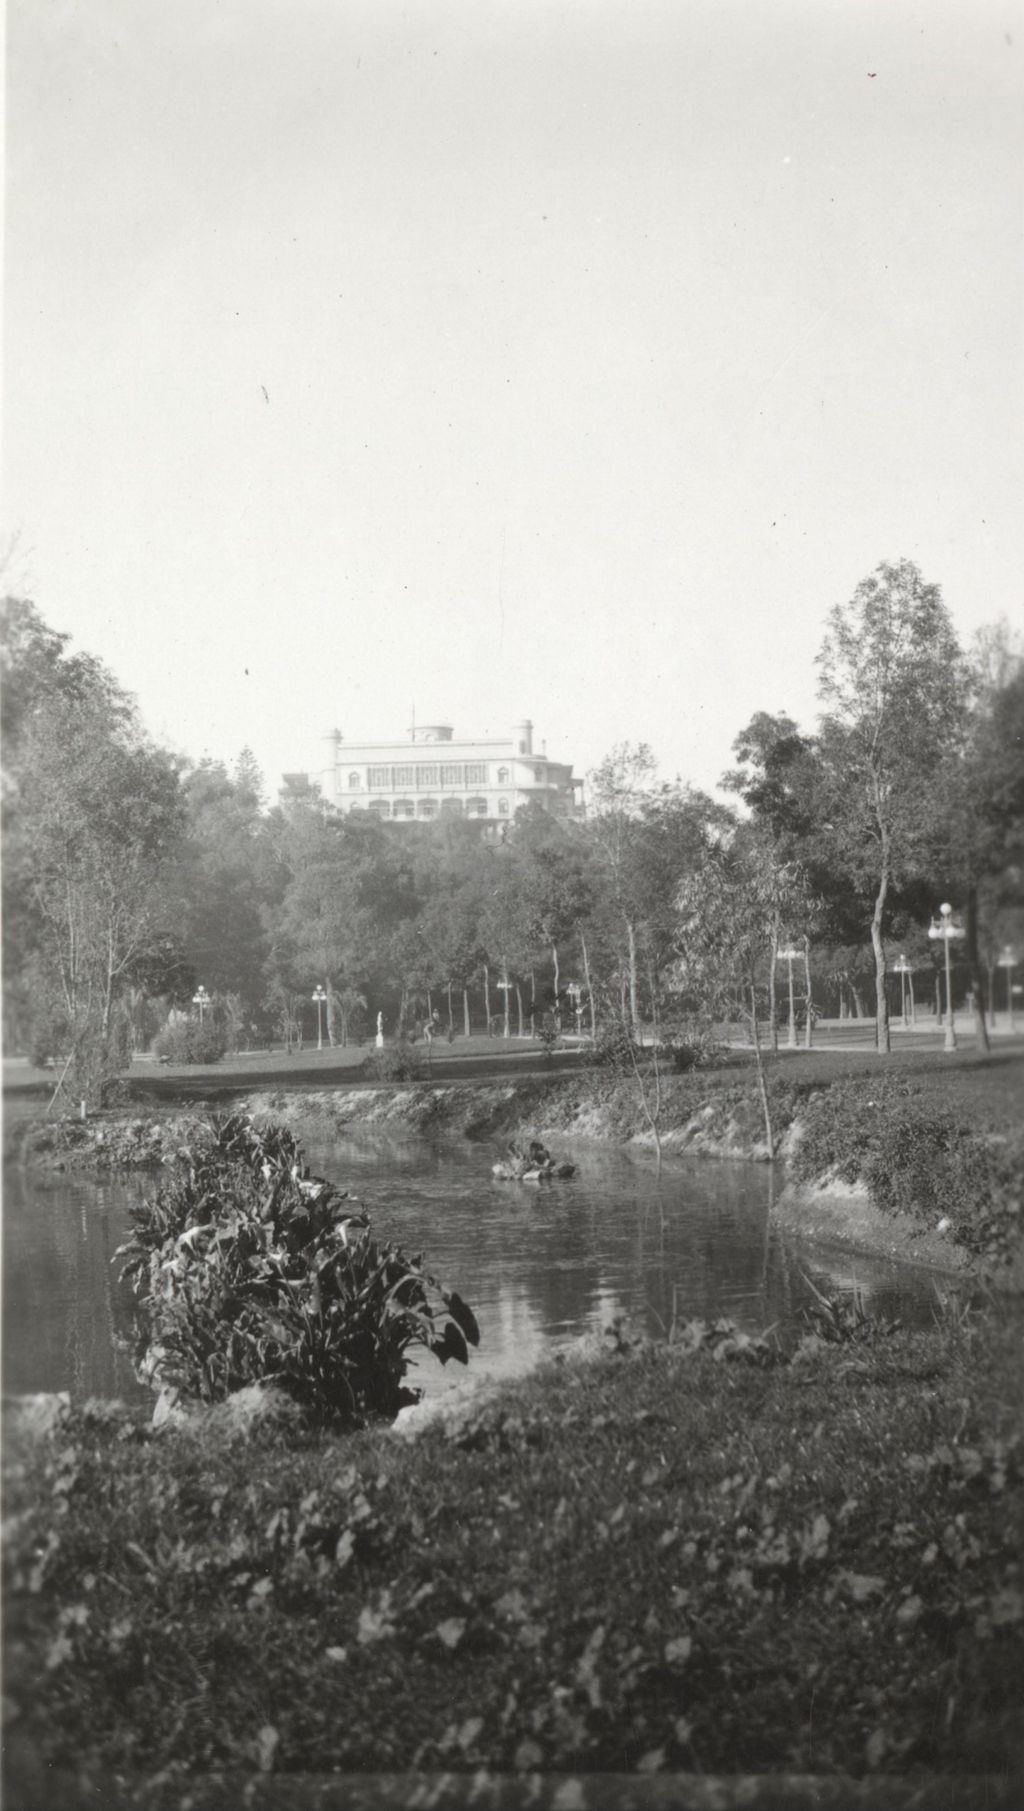 Pond photographed on Jane Addams' trip to Mexico